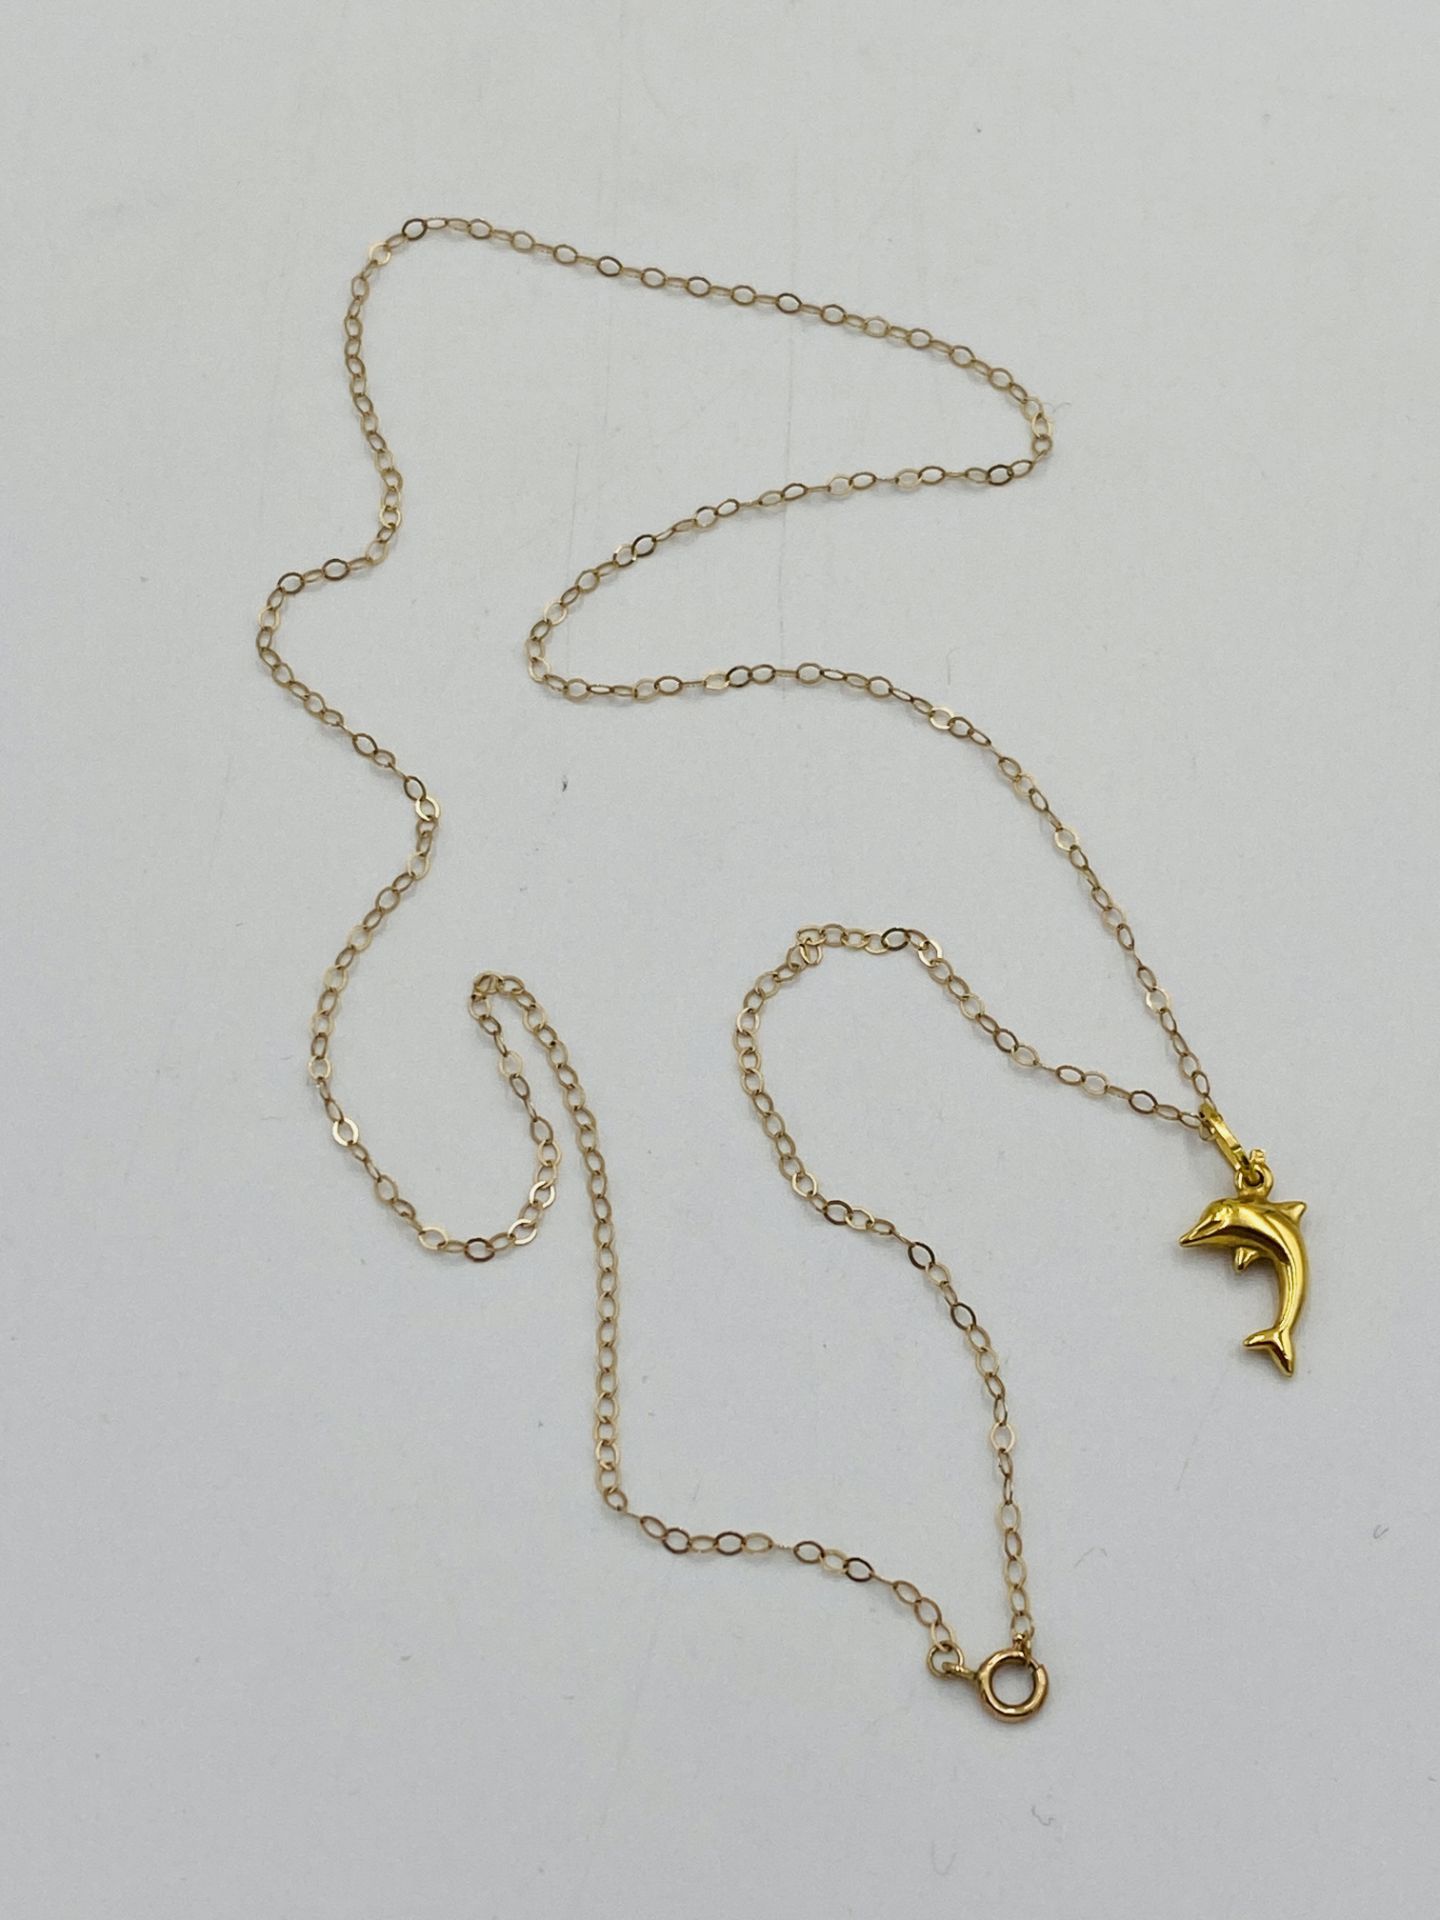 9ct gold necklace with dolphin pendant - Image 4 of 4